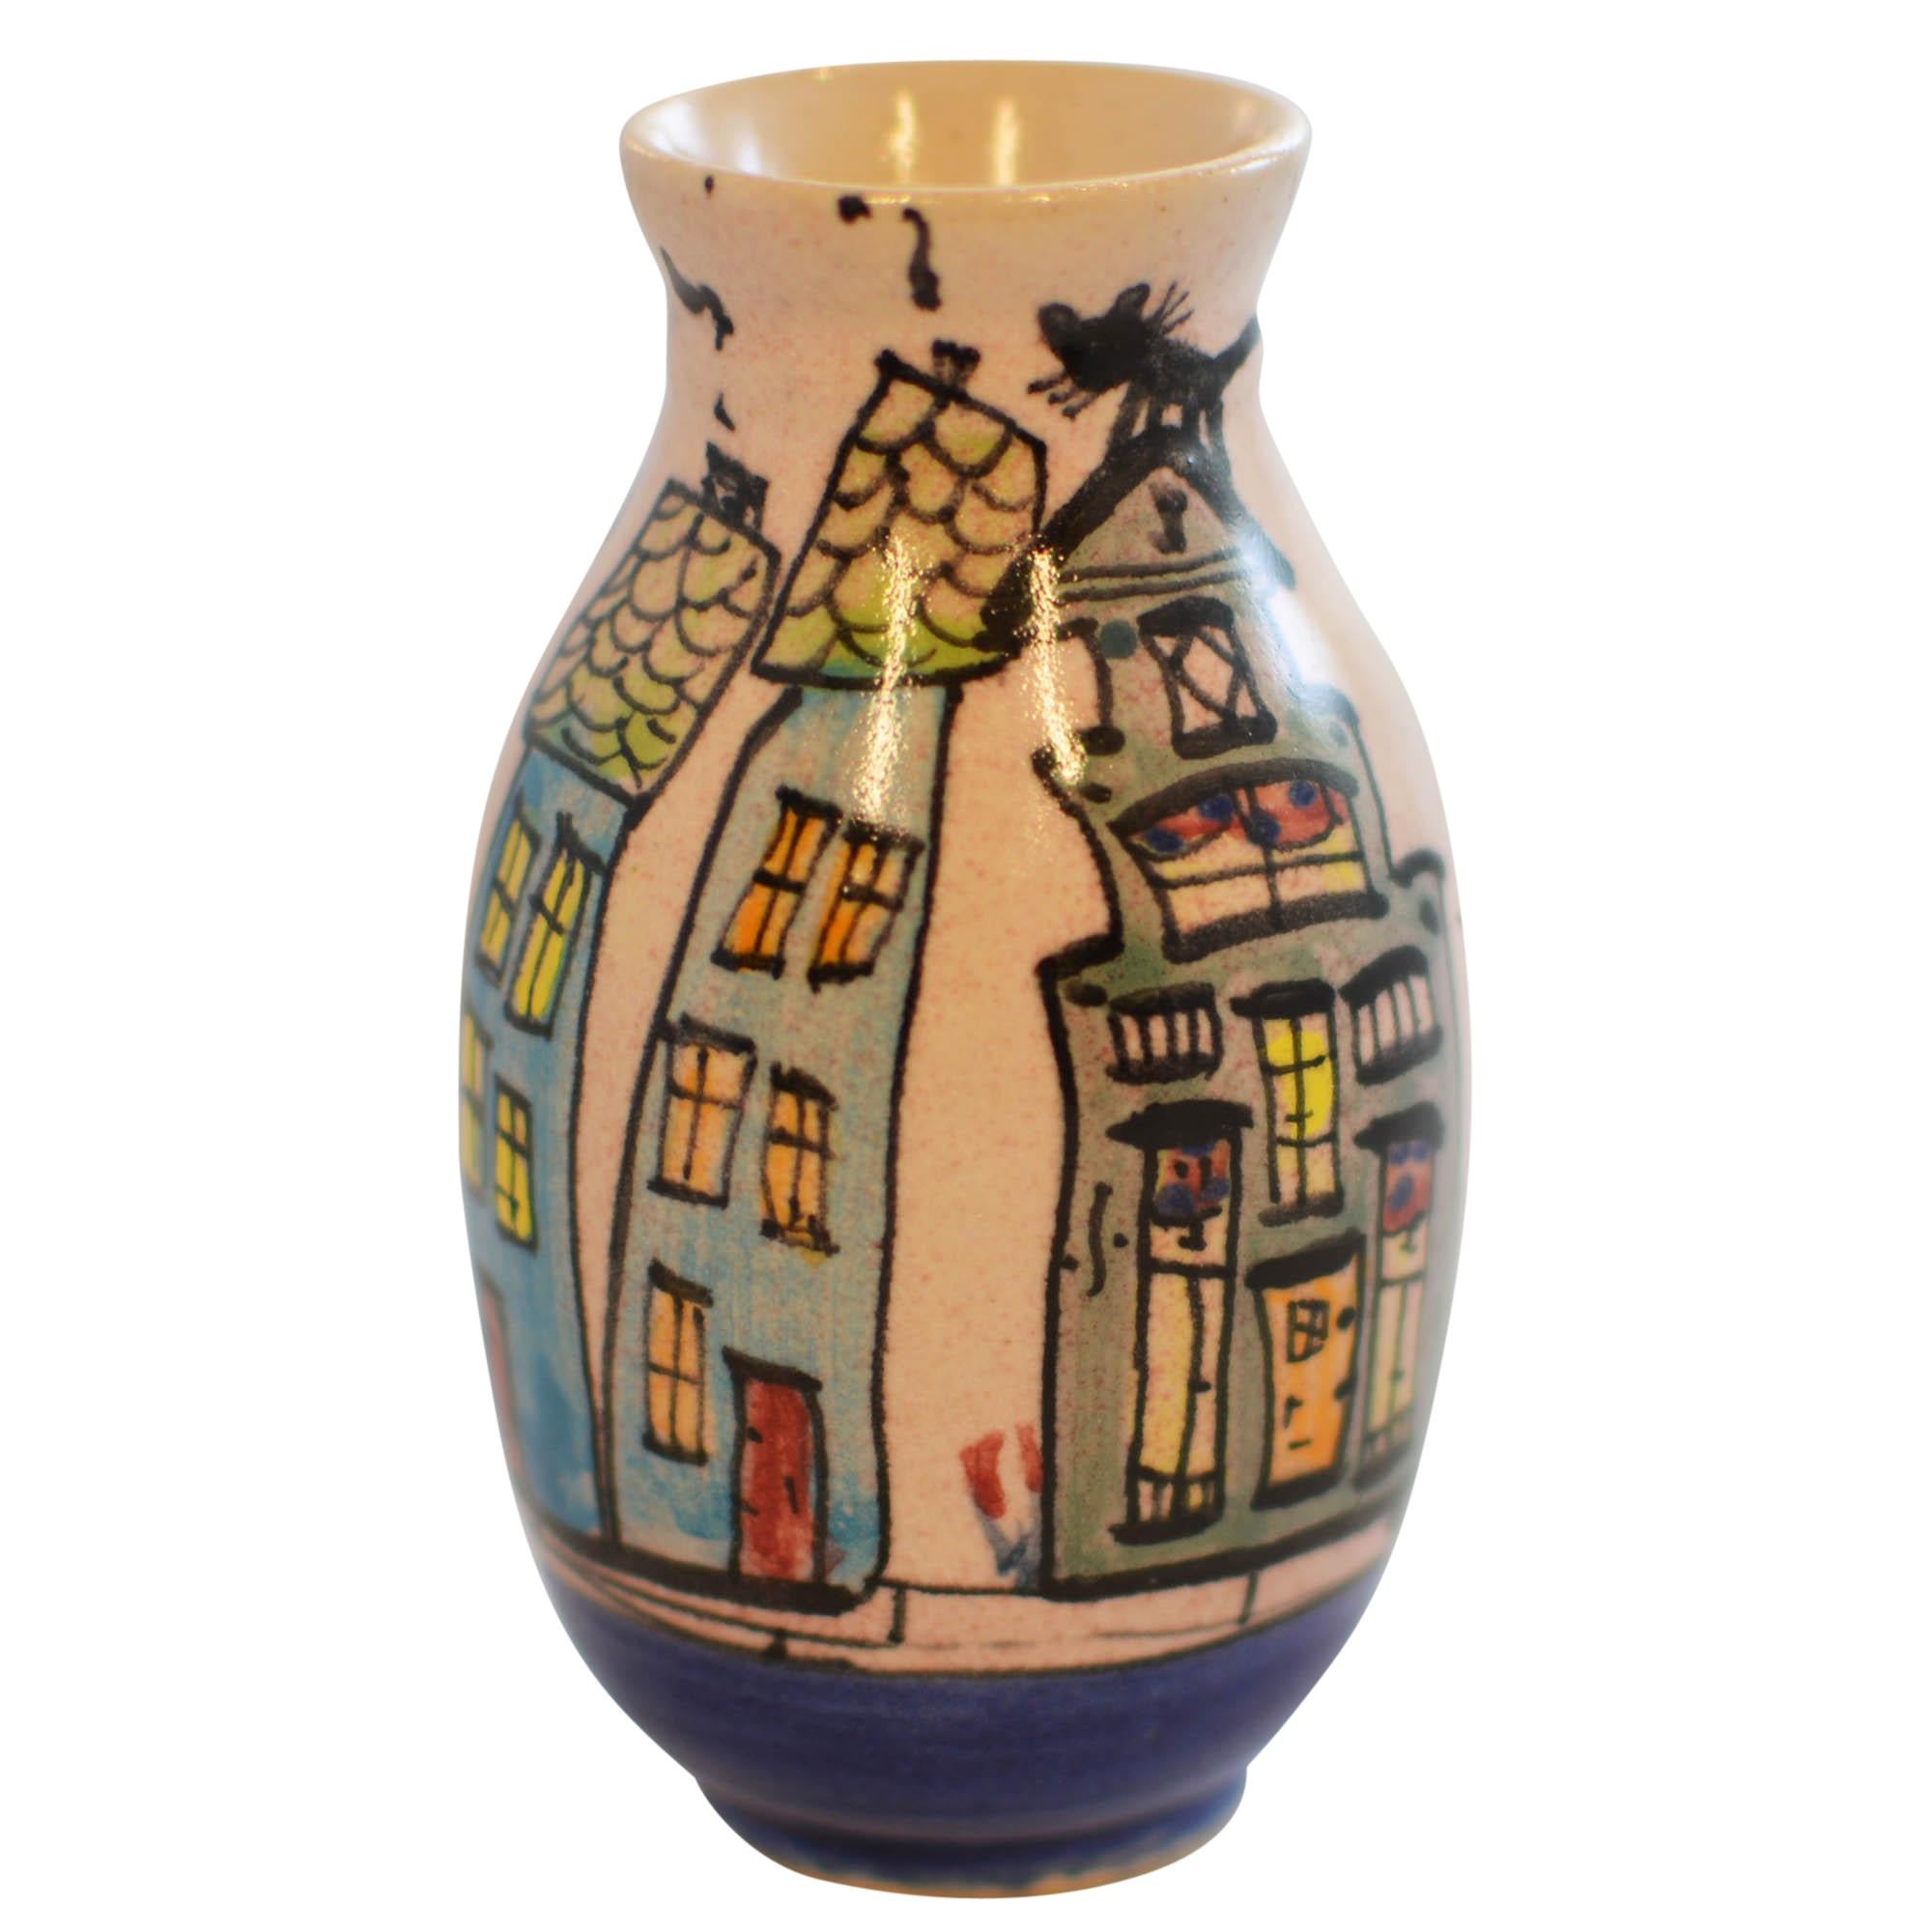 handcrafted bud vase is the work of Anna Maria Preuss. The vase features a scene of hand painted canal front homes with whimsical cat atop a gray house. Anna's mark is on the bottom. Vase measures 2.75